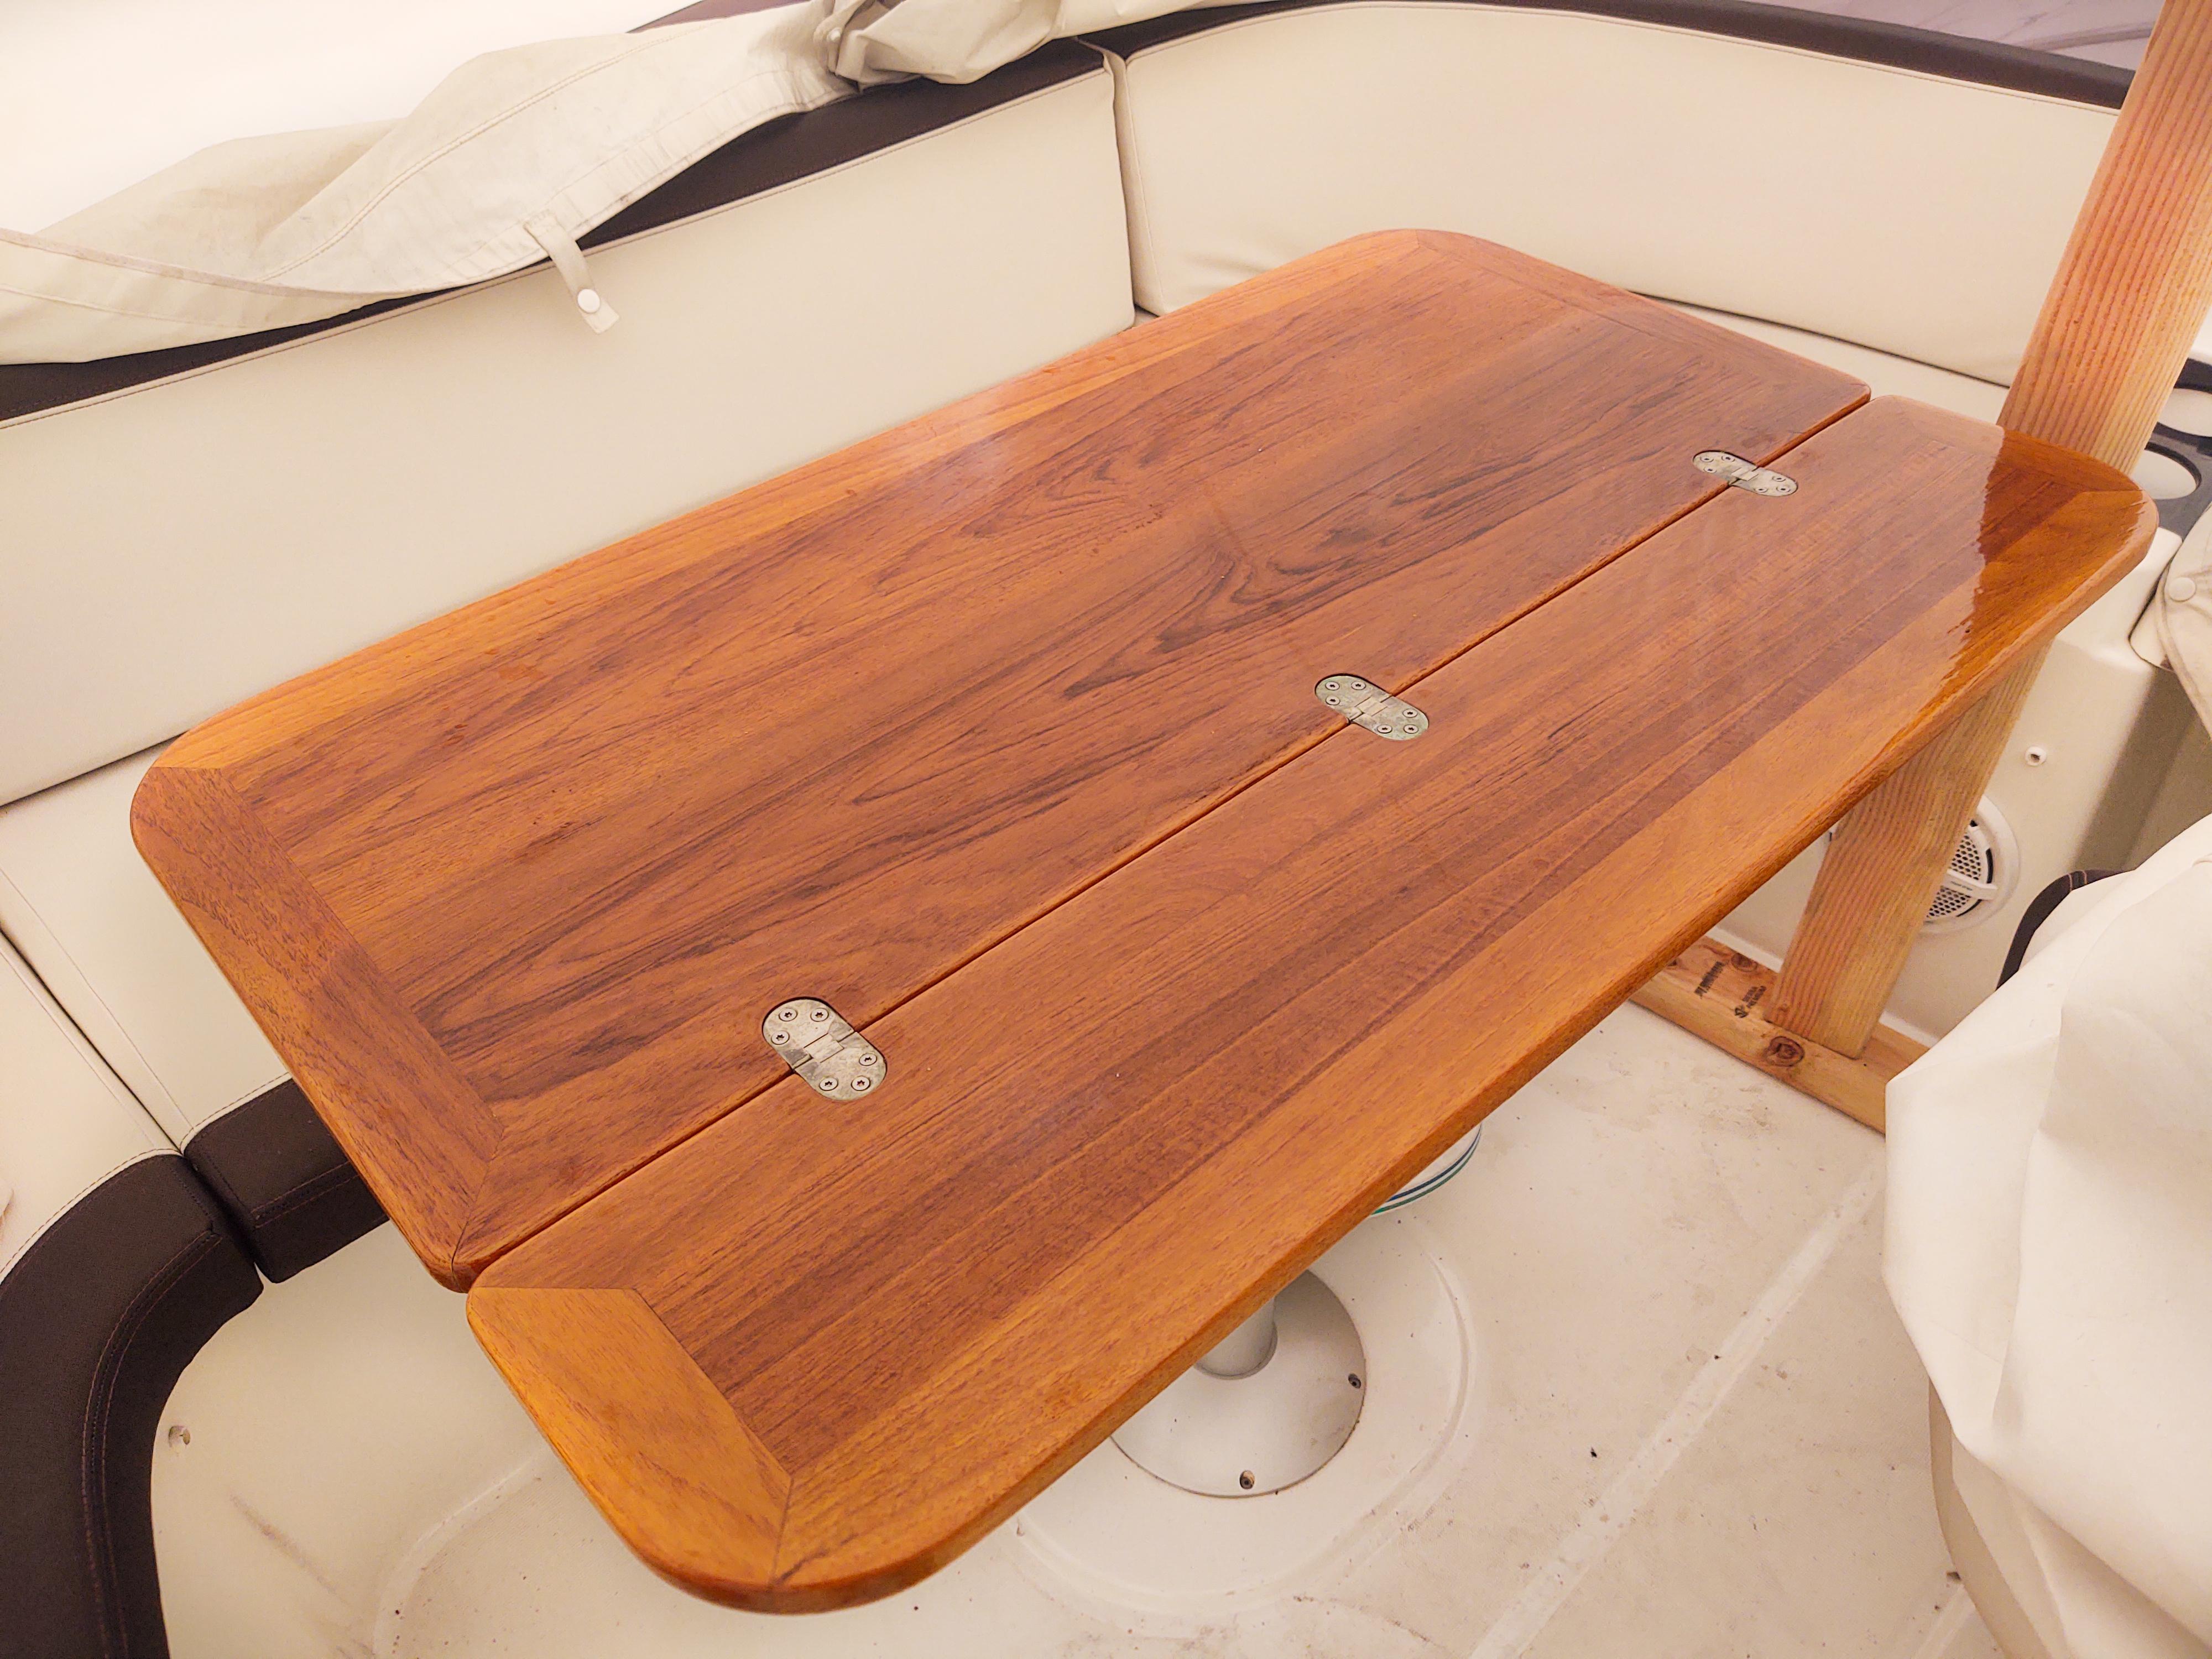 Flybridge table with leaf extended